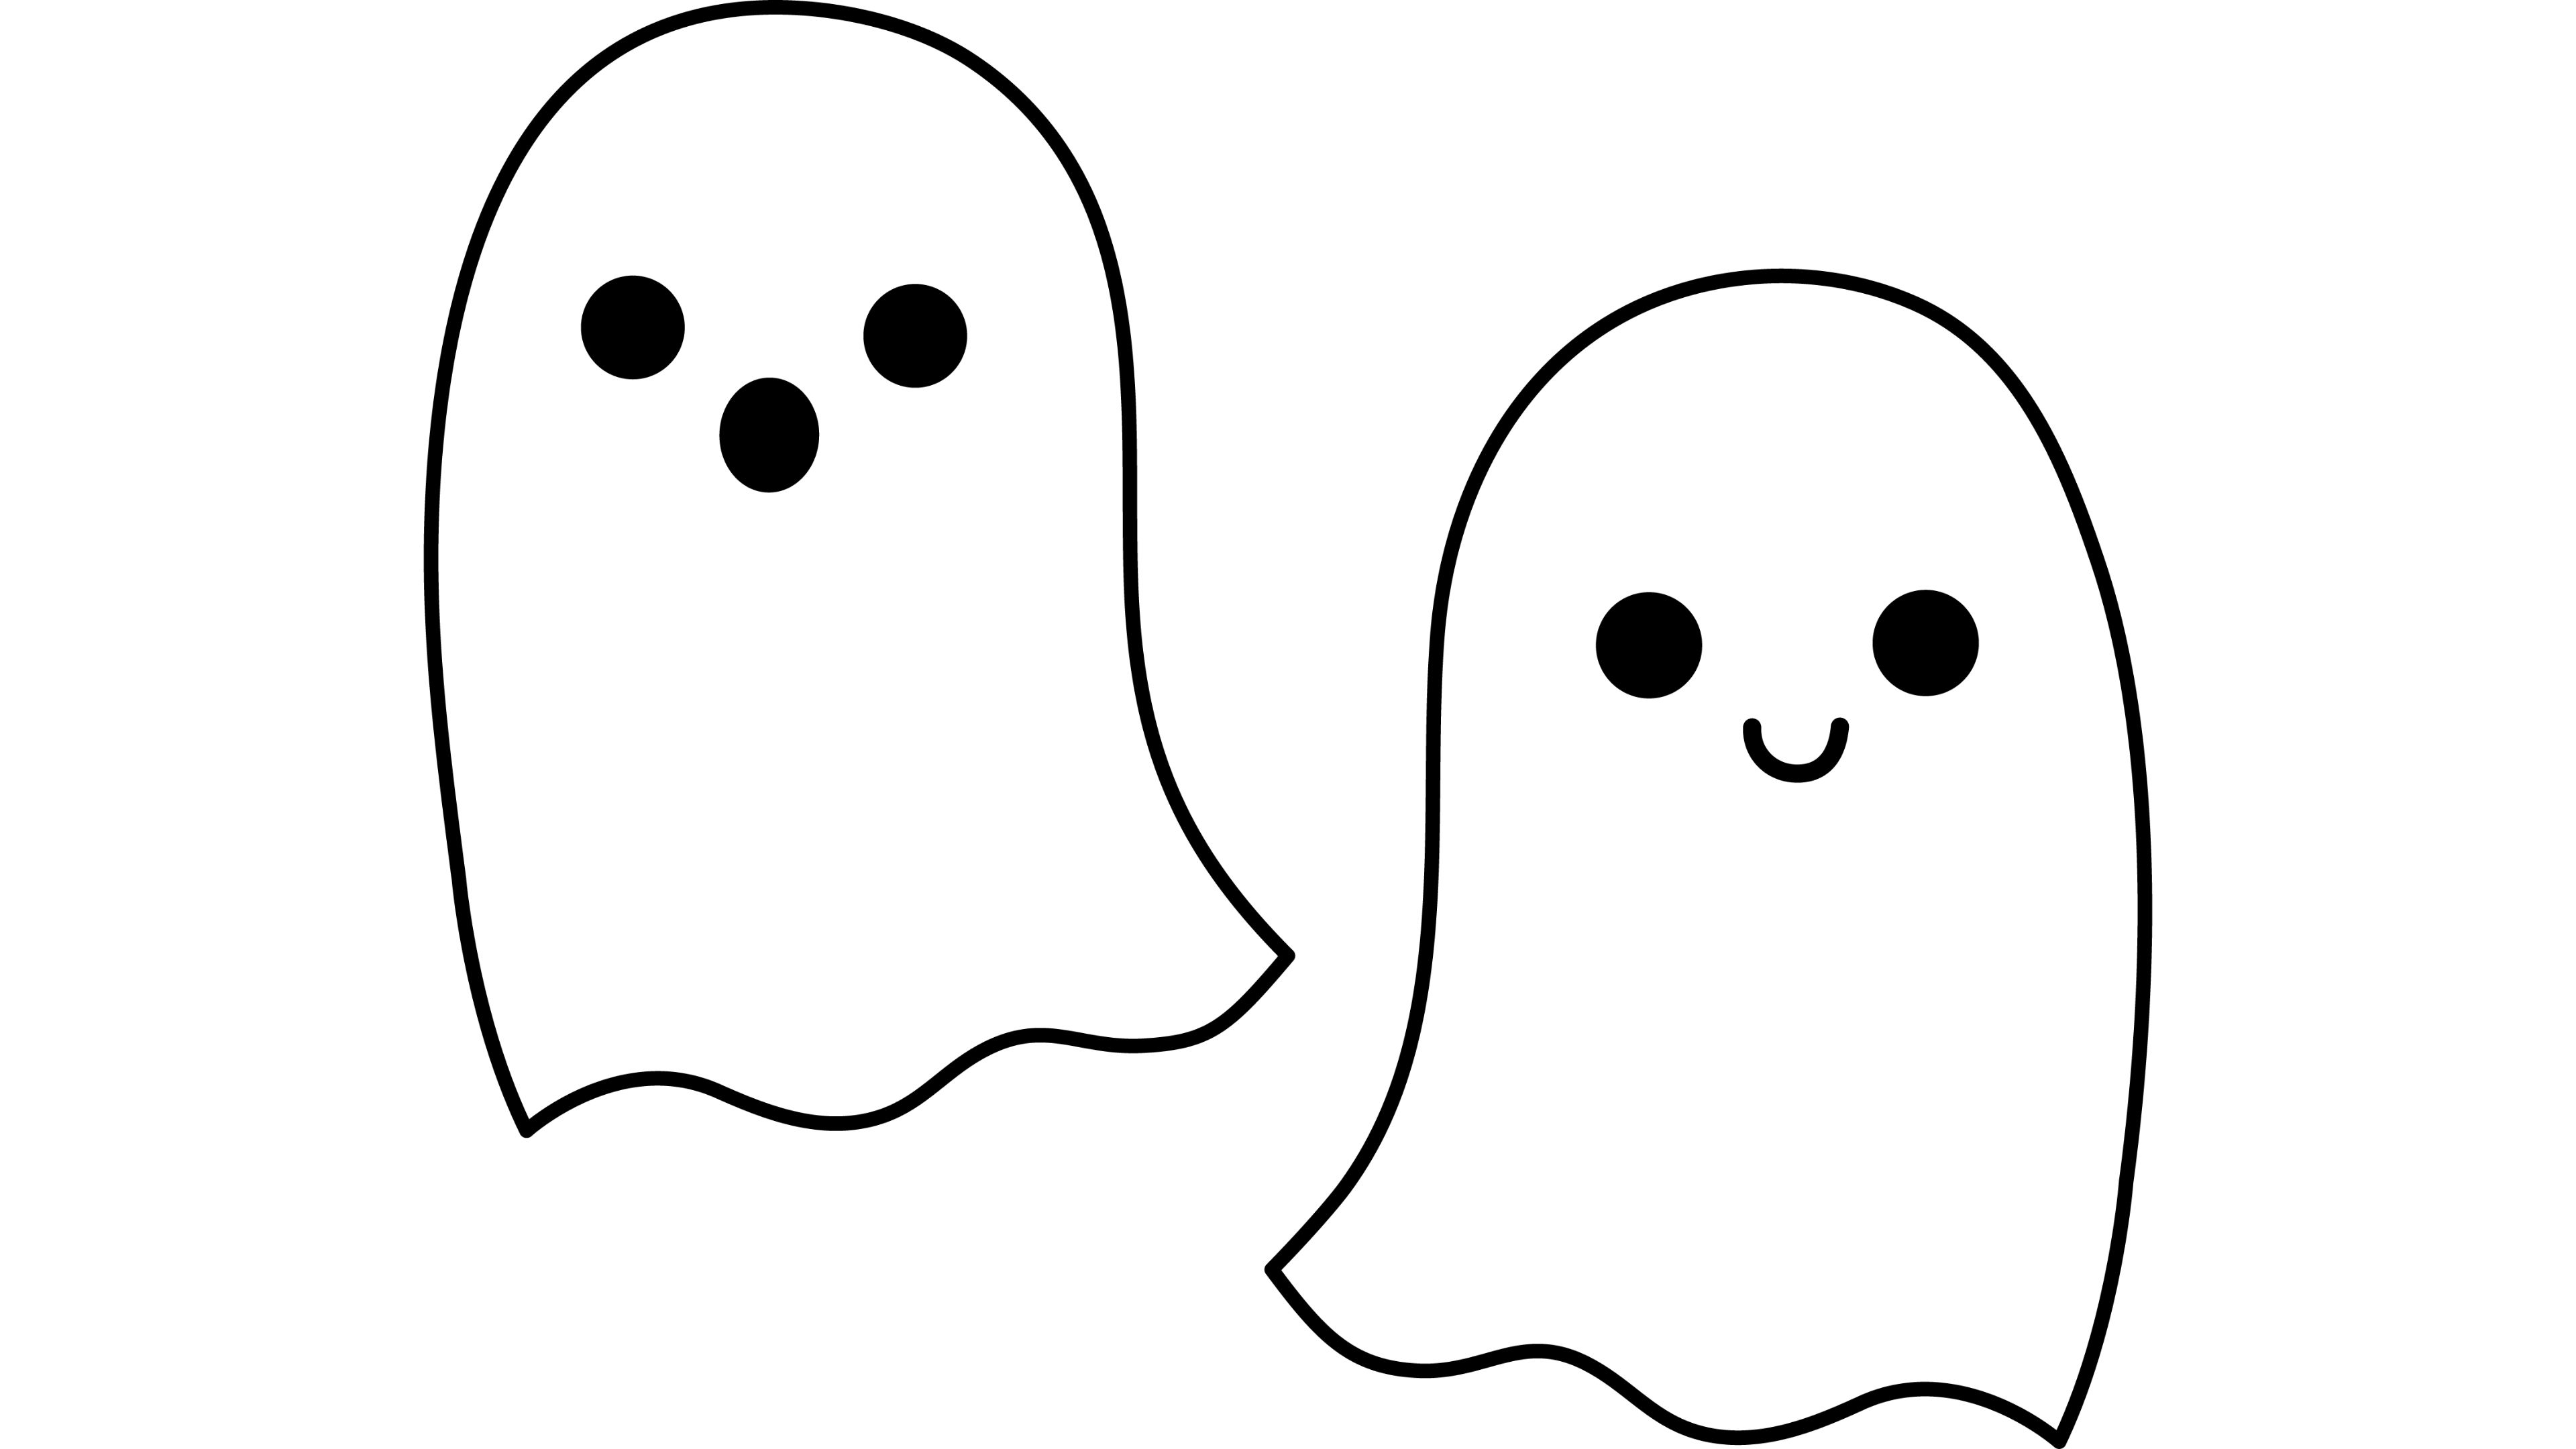 ghostbeachhalloweenwallpaper  Gallery Yopriceville  HighQuality Free  Images and Transparent PNG Clipart